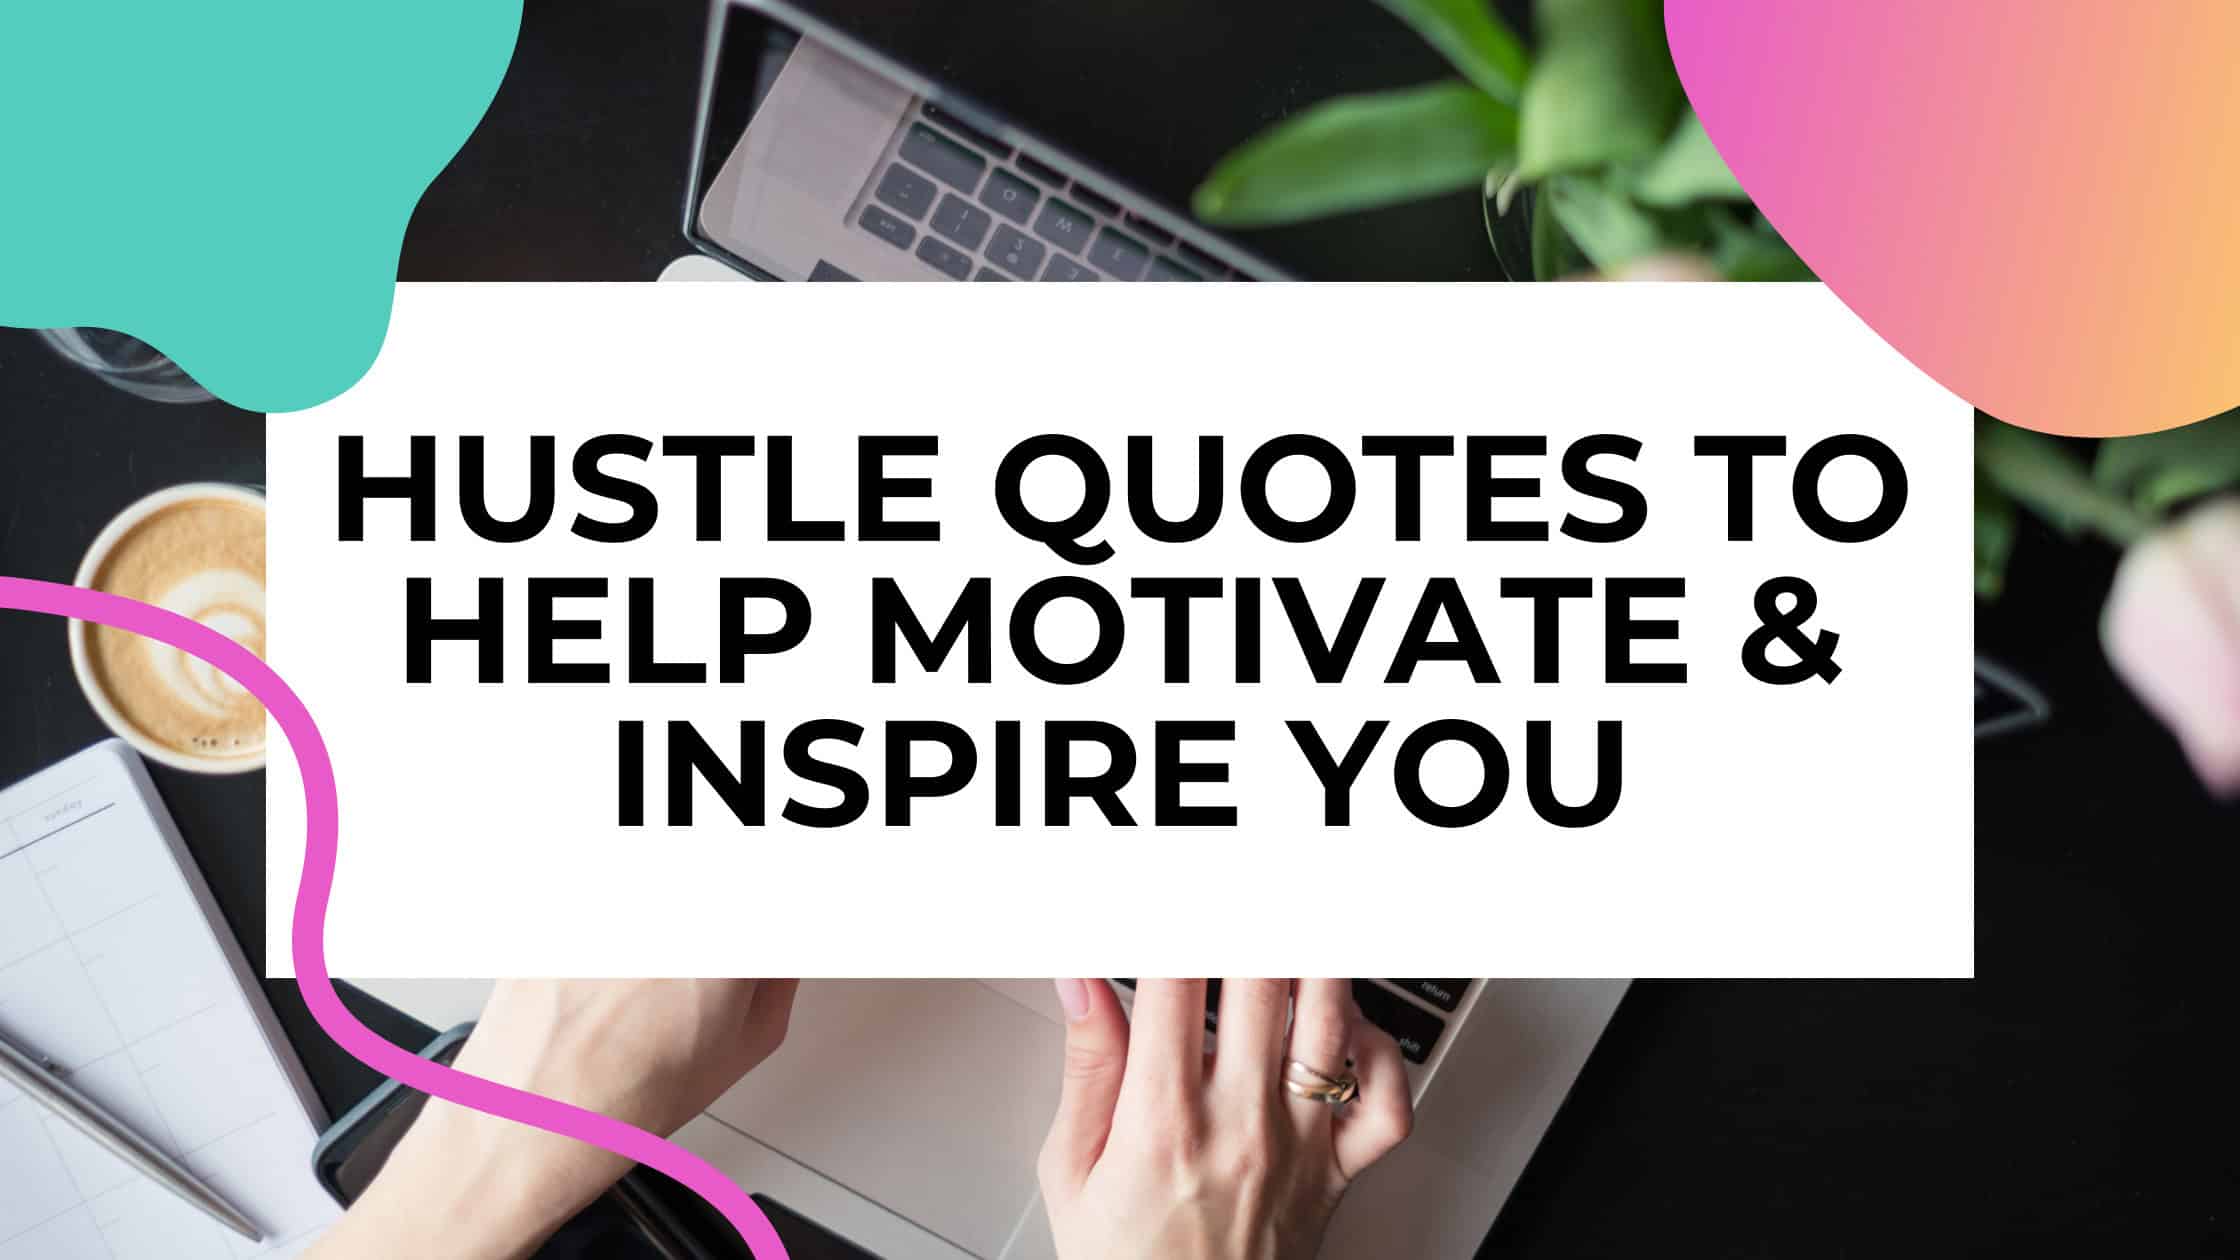 Hustle quotes blog post featured image